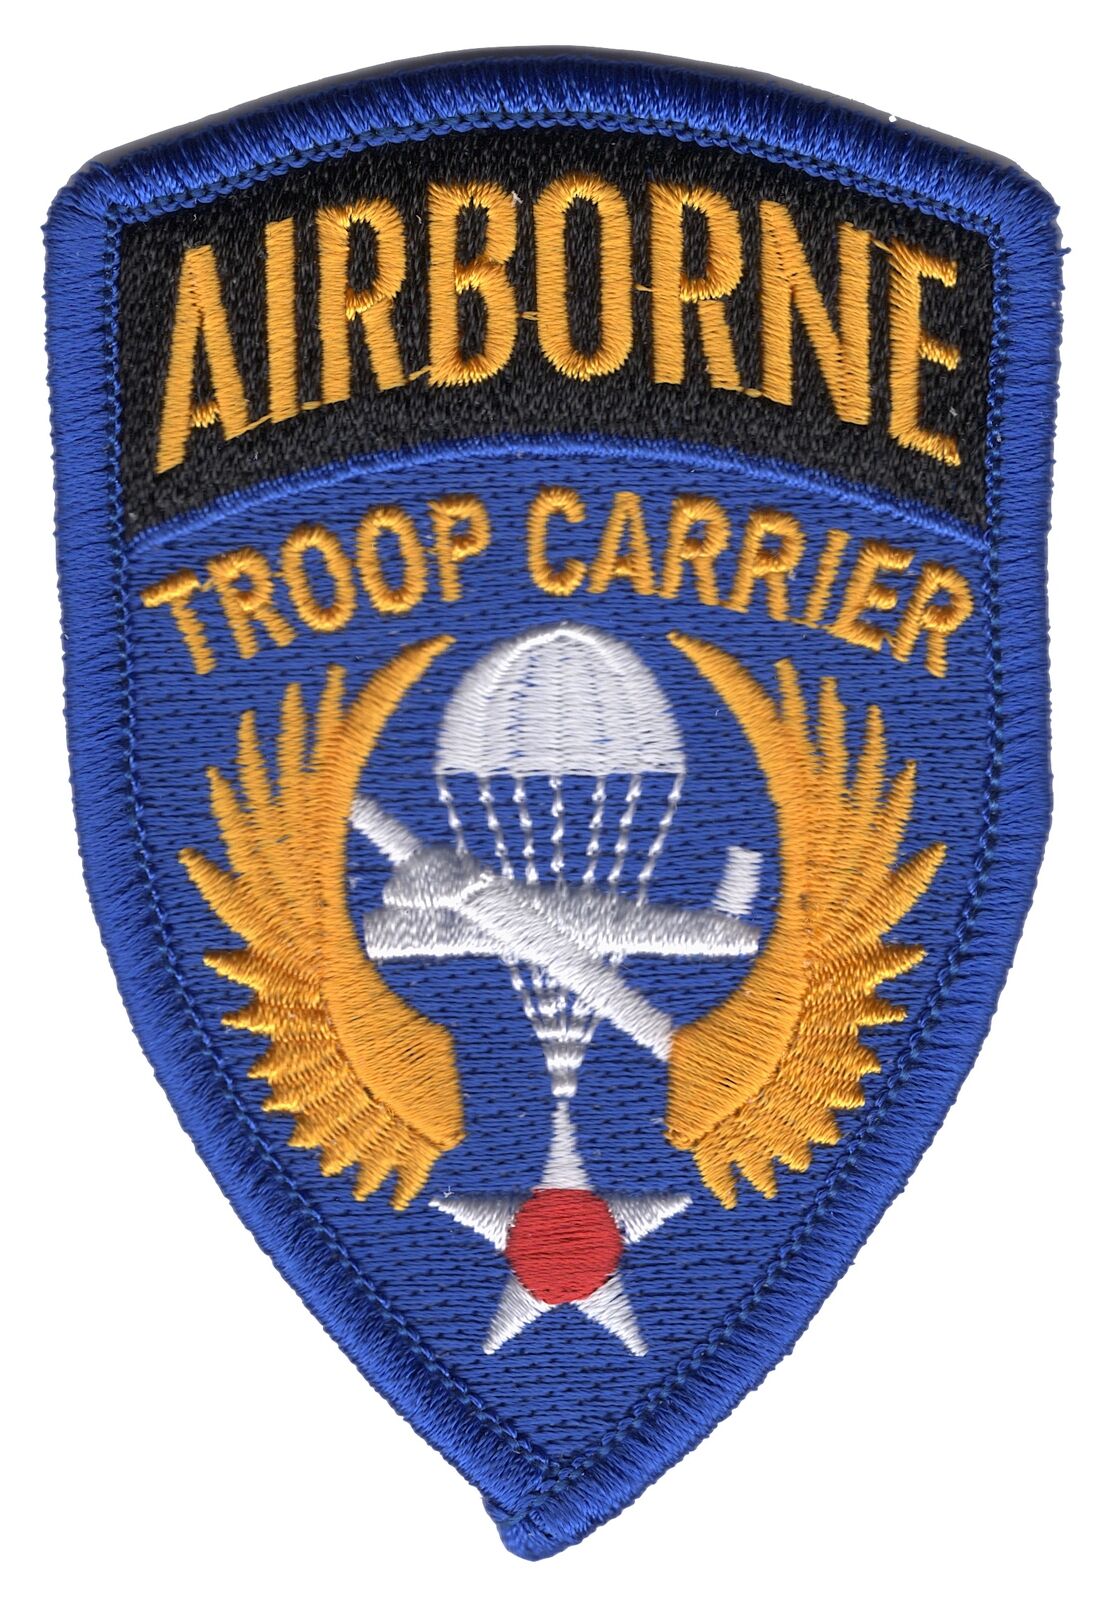 Airborne Troop Carrier Patch WWII